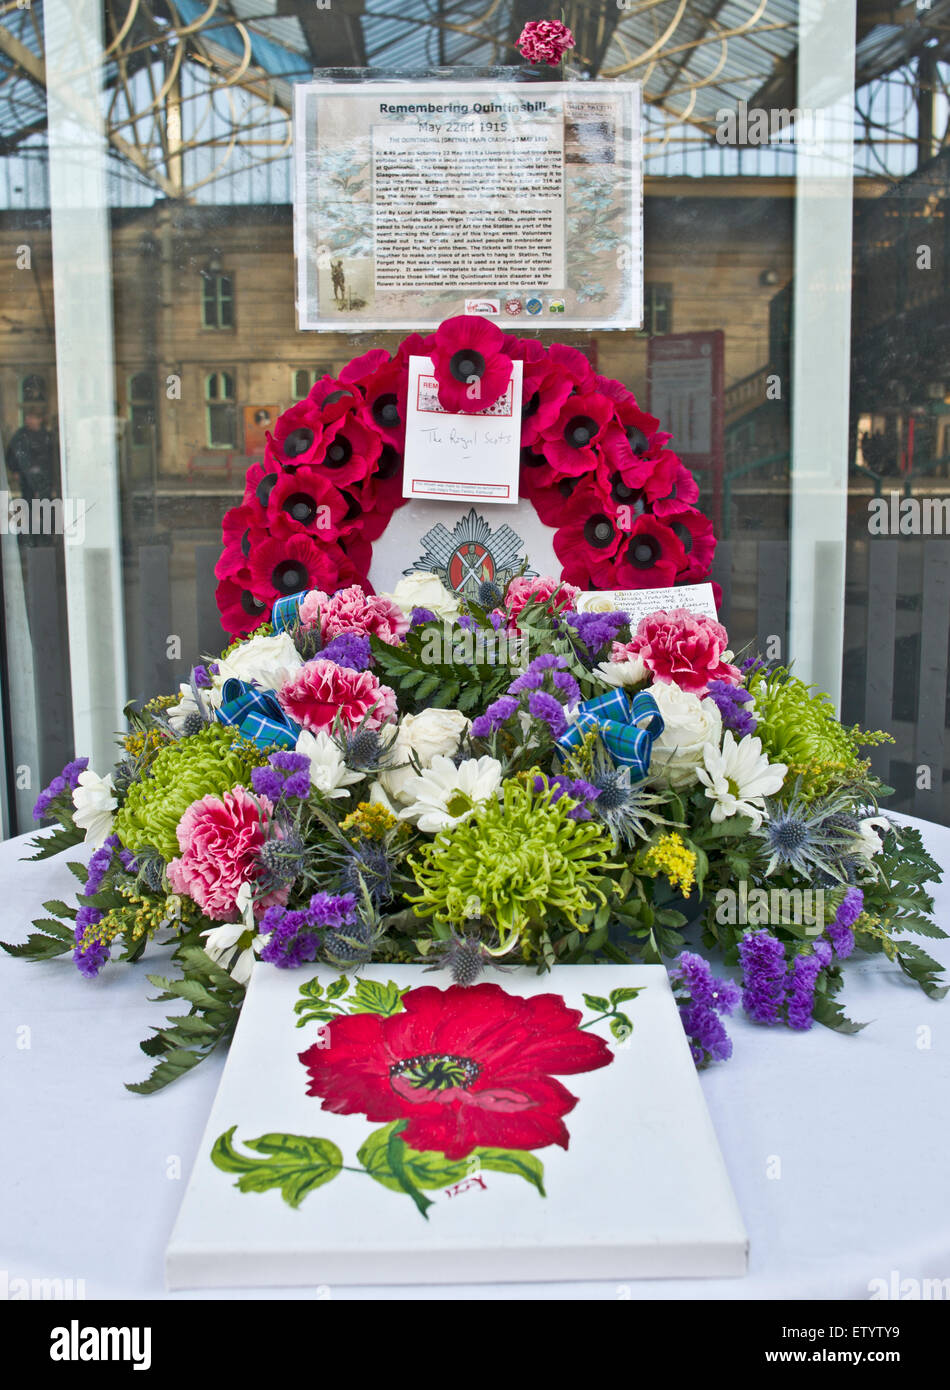 Wreath and floral arrangement commemorating Quintinshill rail disaster on display at Carlisle railway station, Cumbria UK Stock Photo